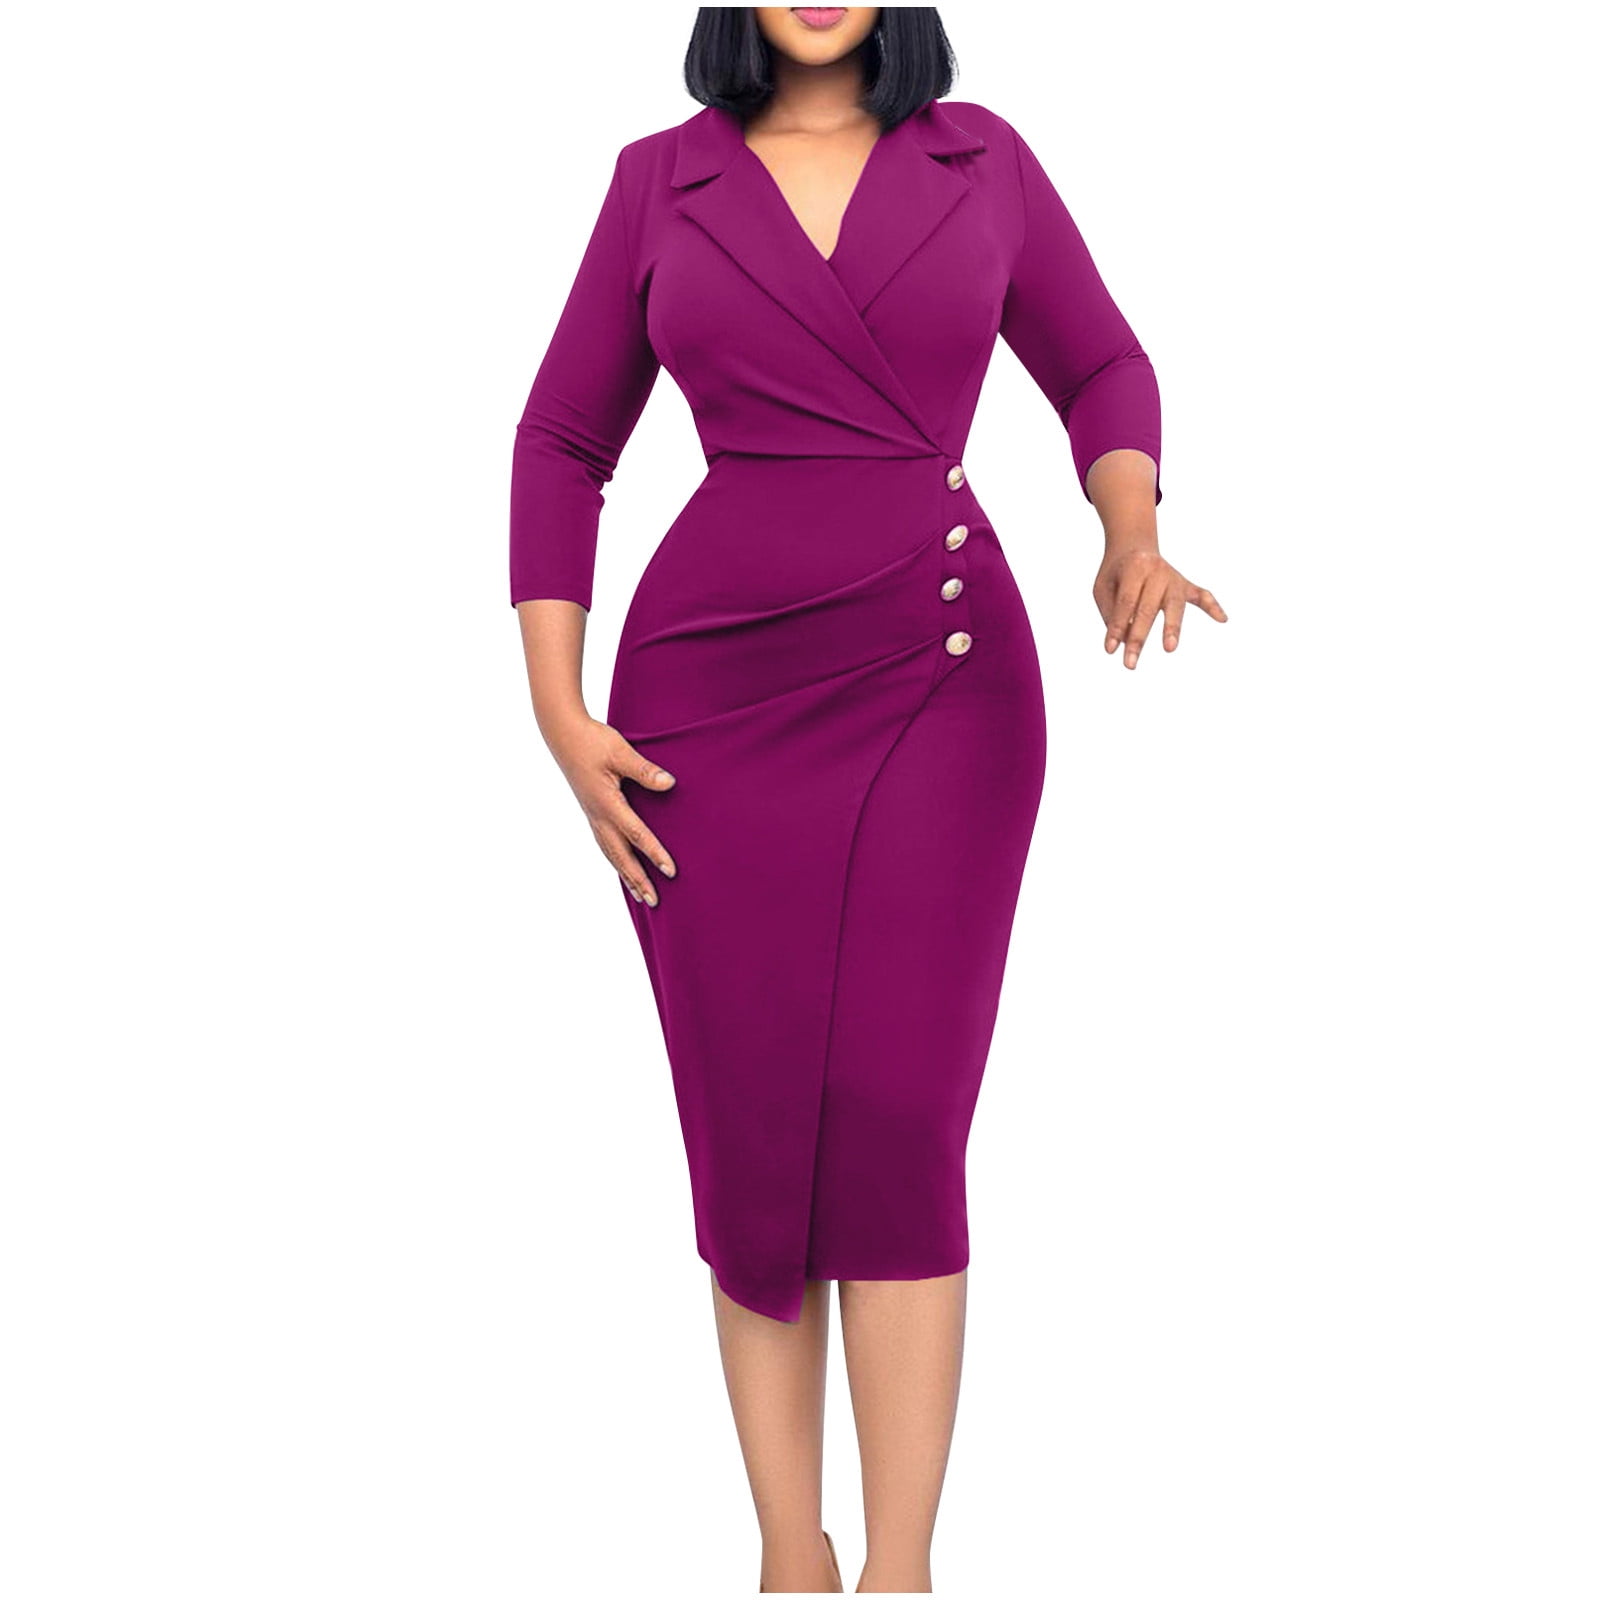 Work Dresses for Women Casual Turn Down Collar Wrap V Neck Long Sleeve  Bodycon Office Business Midi Pencil Dress 